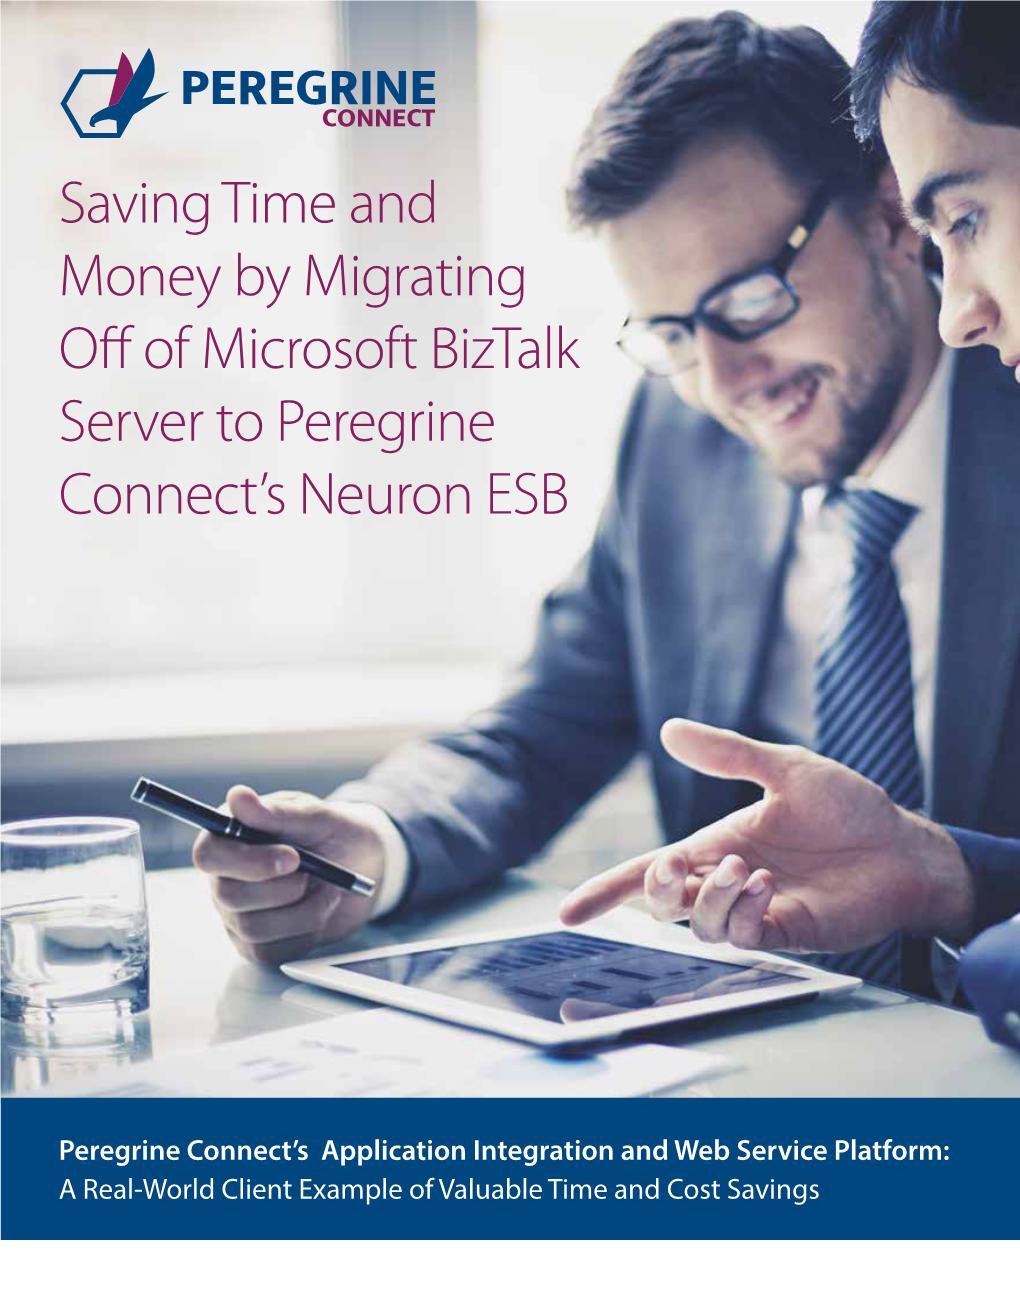 Saving Time and Money by Migrating Off of Microsoft Biztalk Server to Peregrine Connect’S Neuron ESB